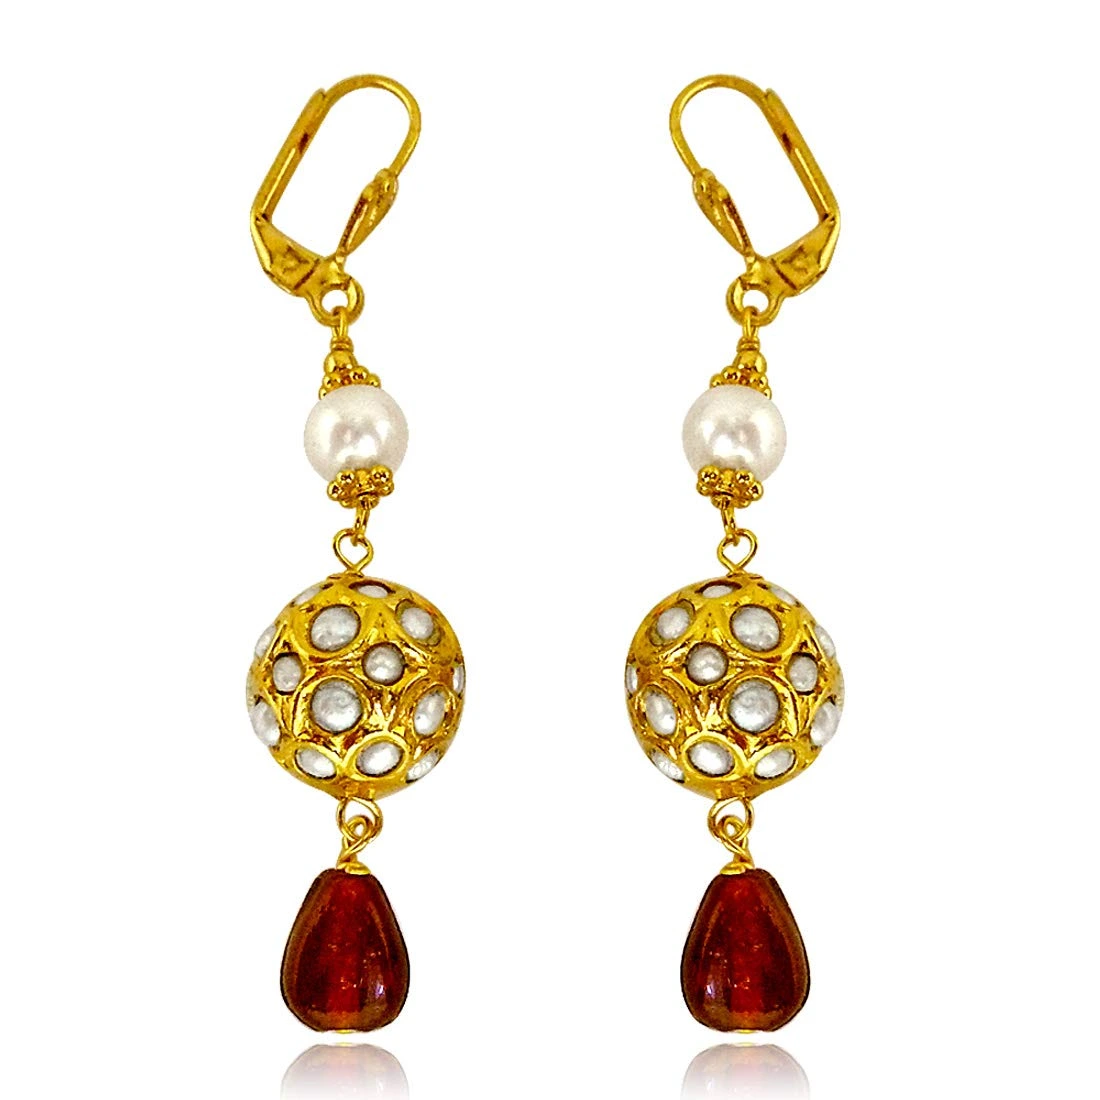 Round Kundan Beads & Red Coloured stone hanging Earrings for Women (SE133)